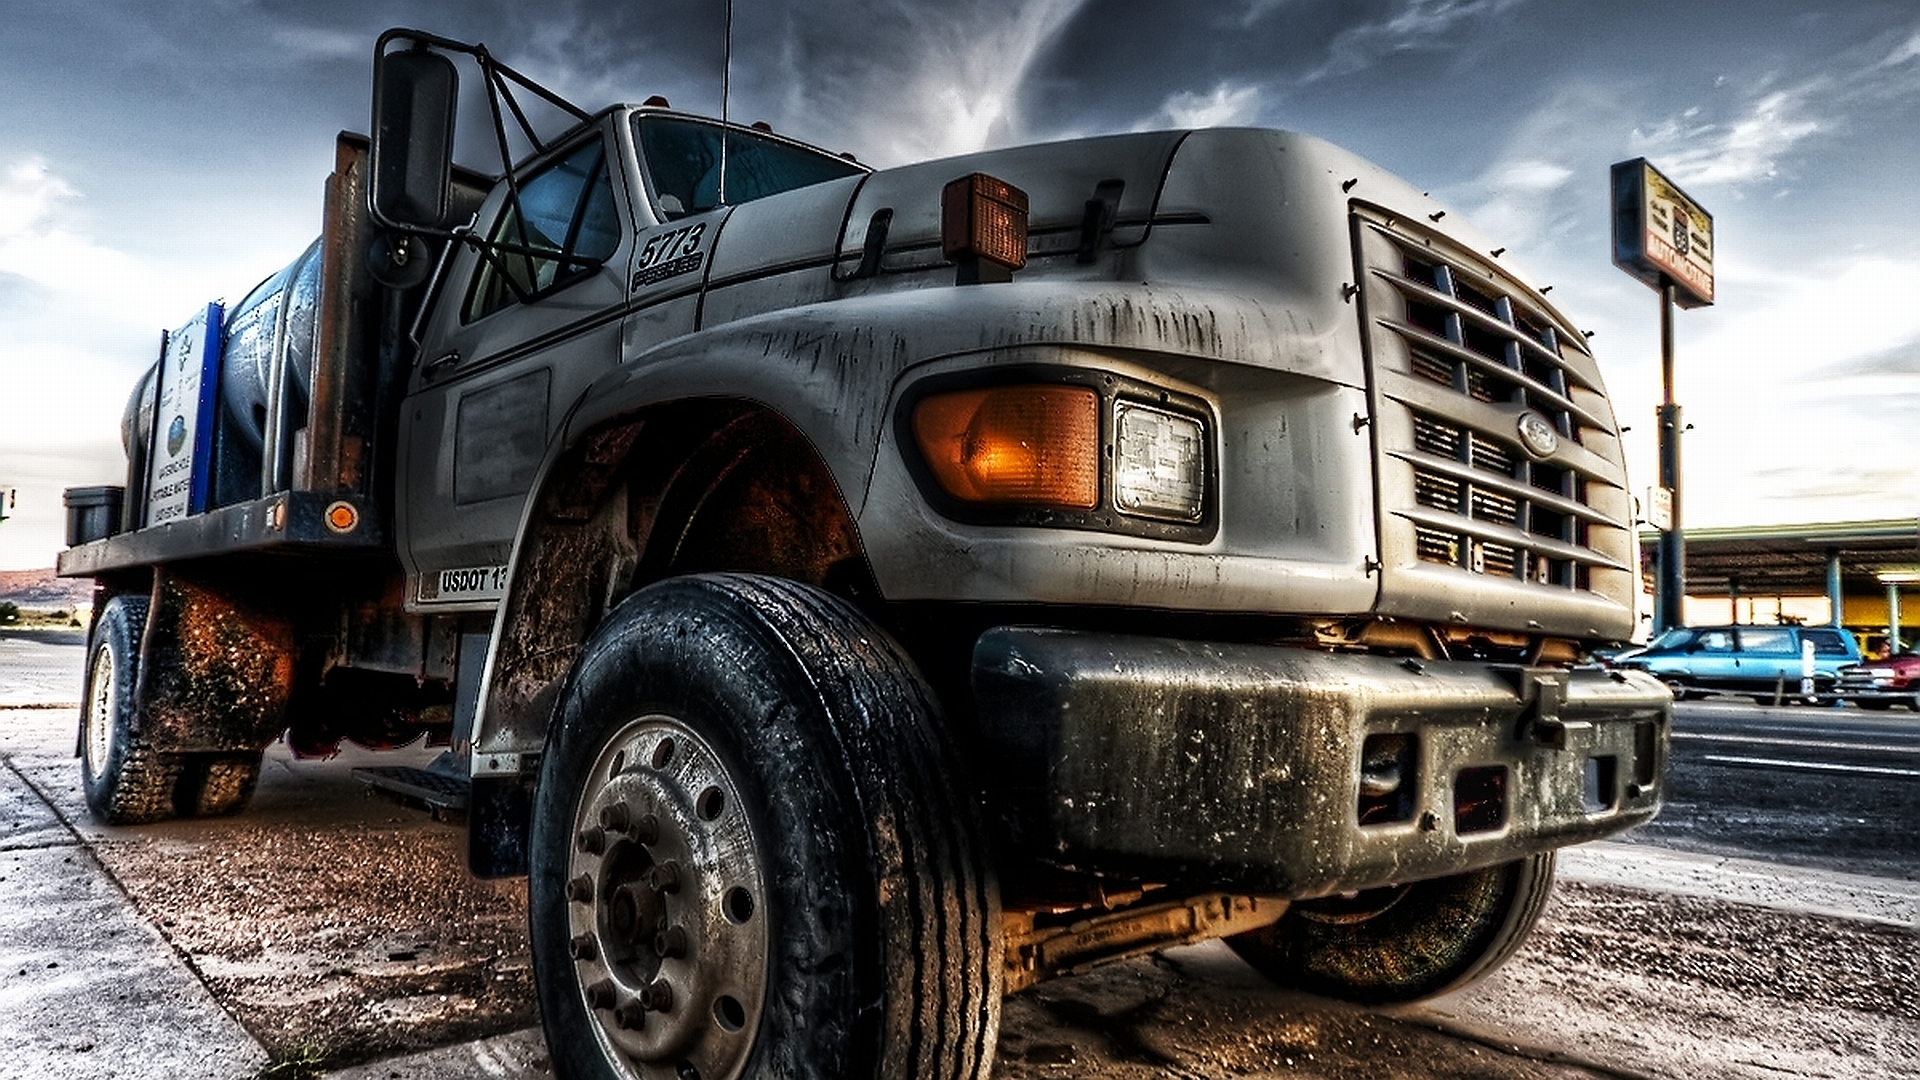 289 Truck HD Wallpapers | Backgrounds - Wallpaper Abyss - Page 3